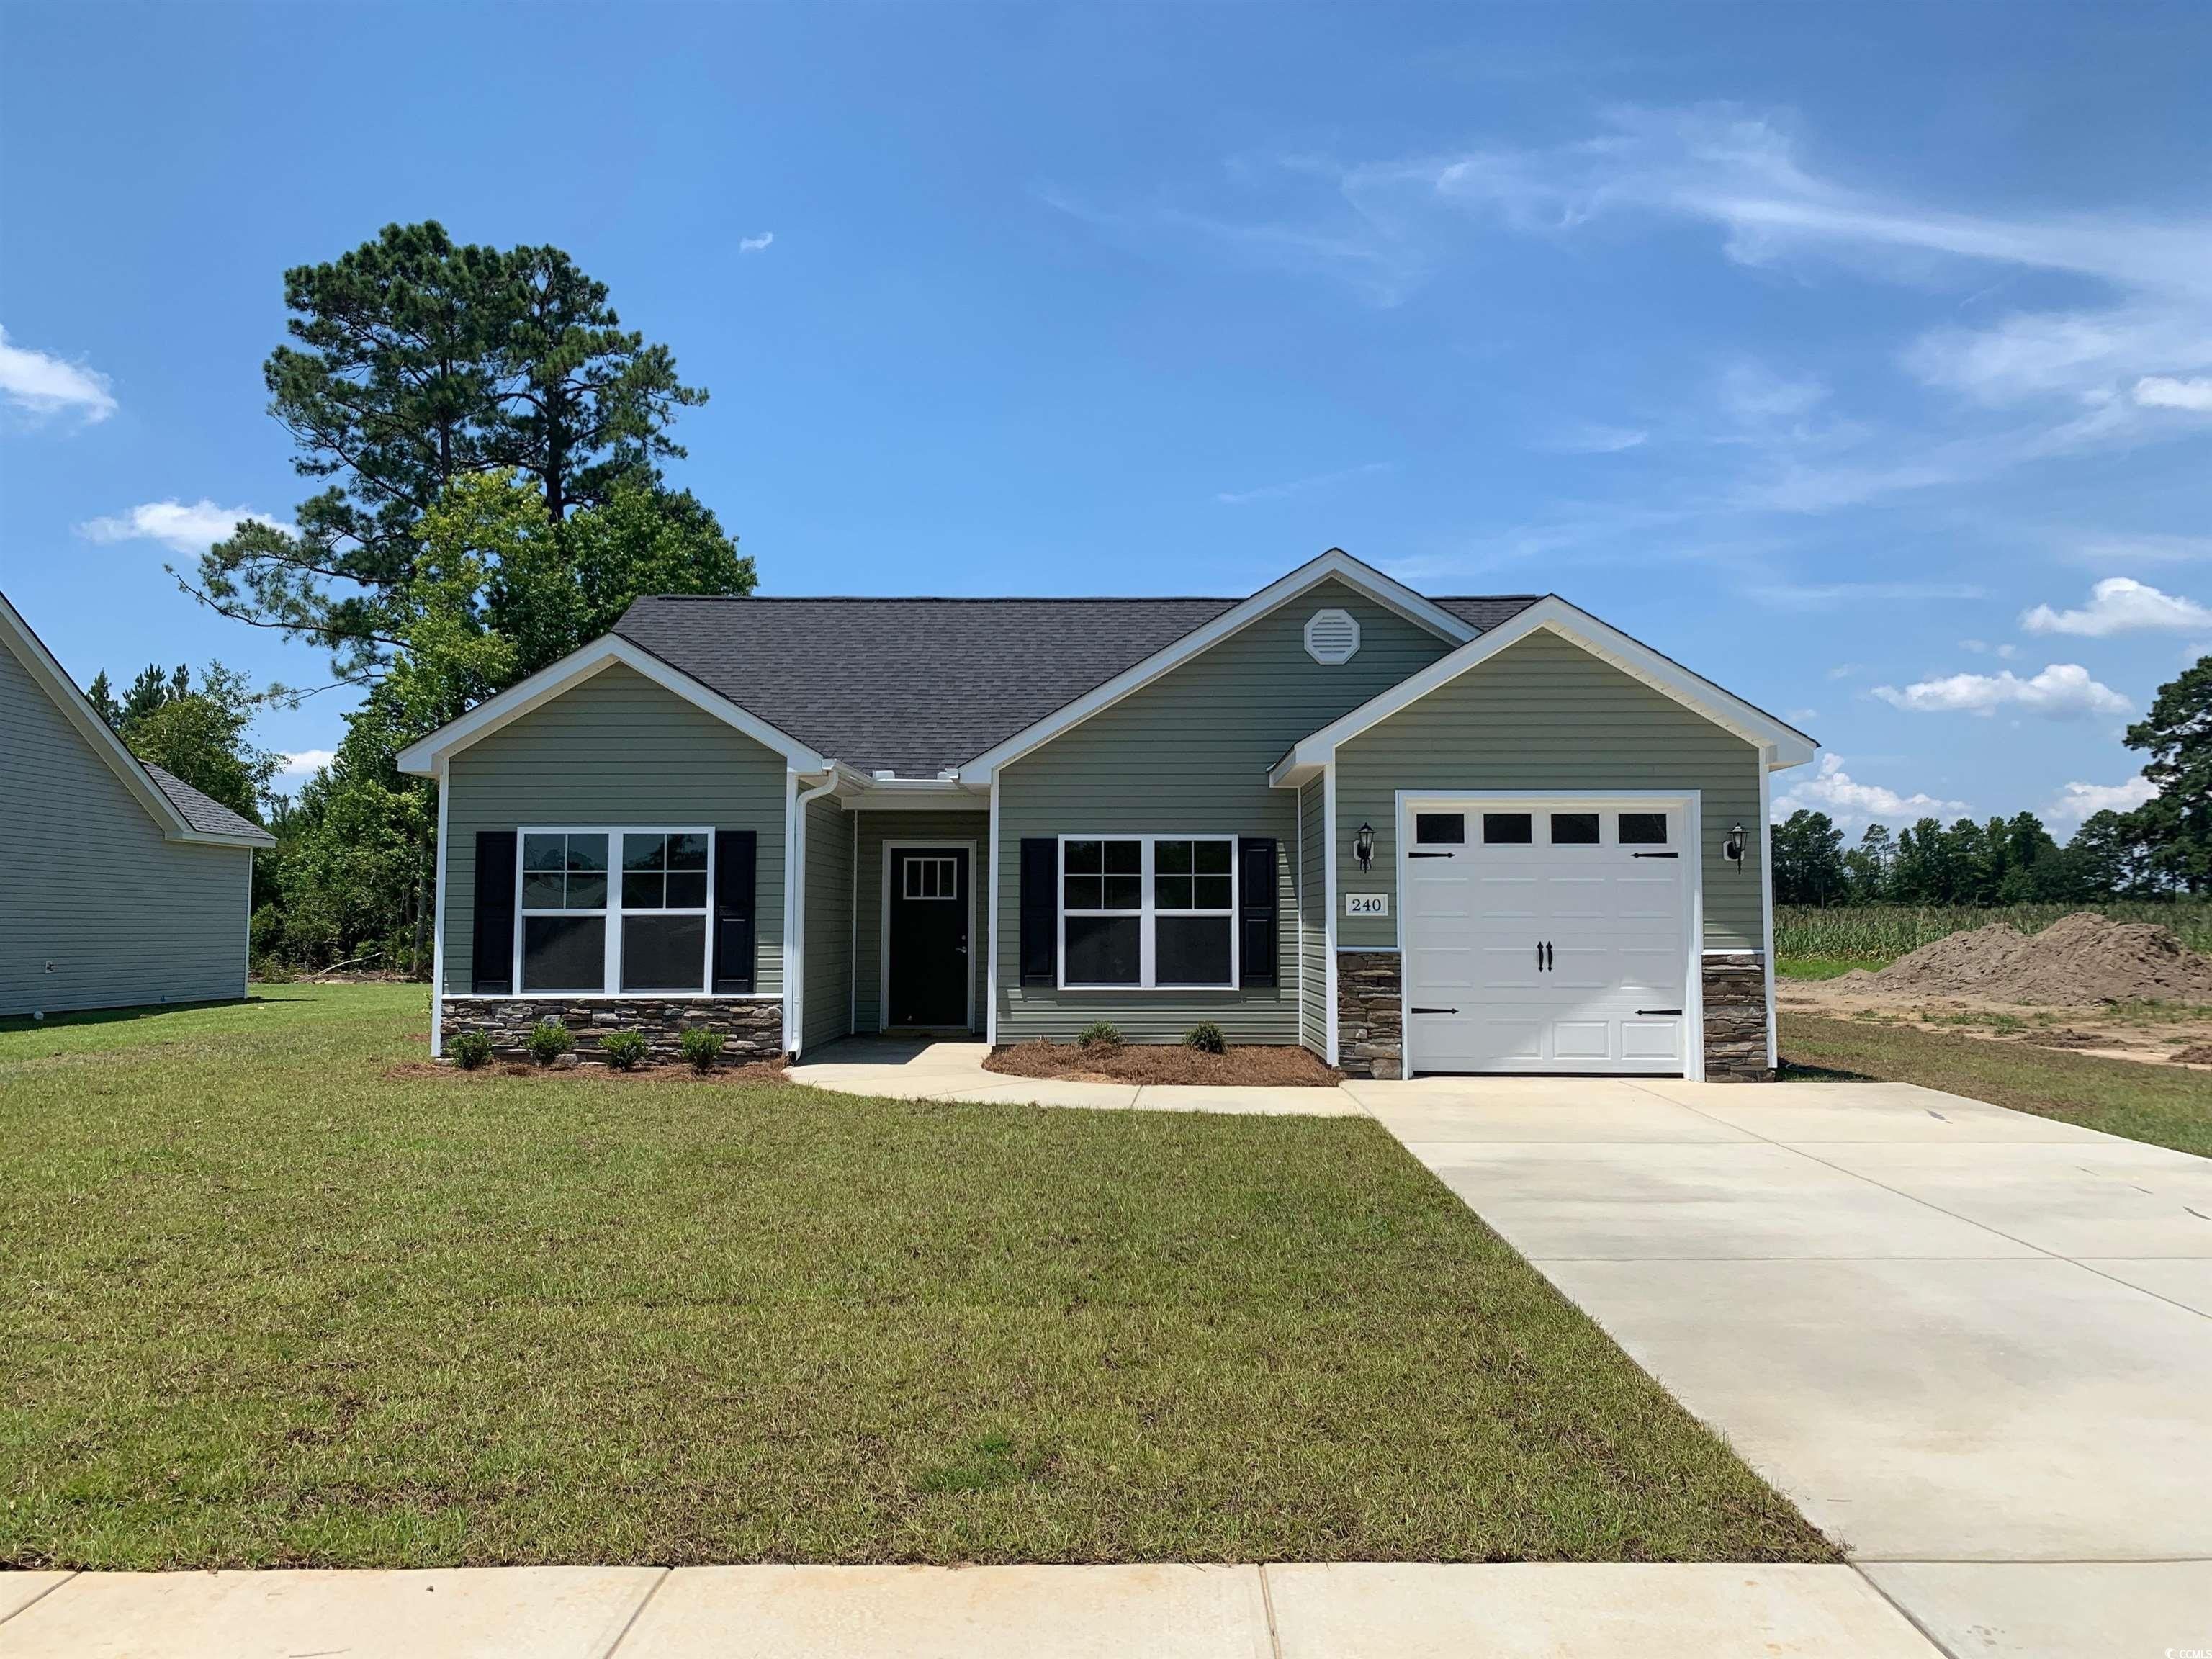 430 Shallow Cove Dr. Conway, SC 29527